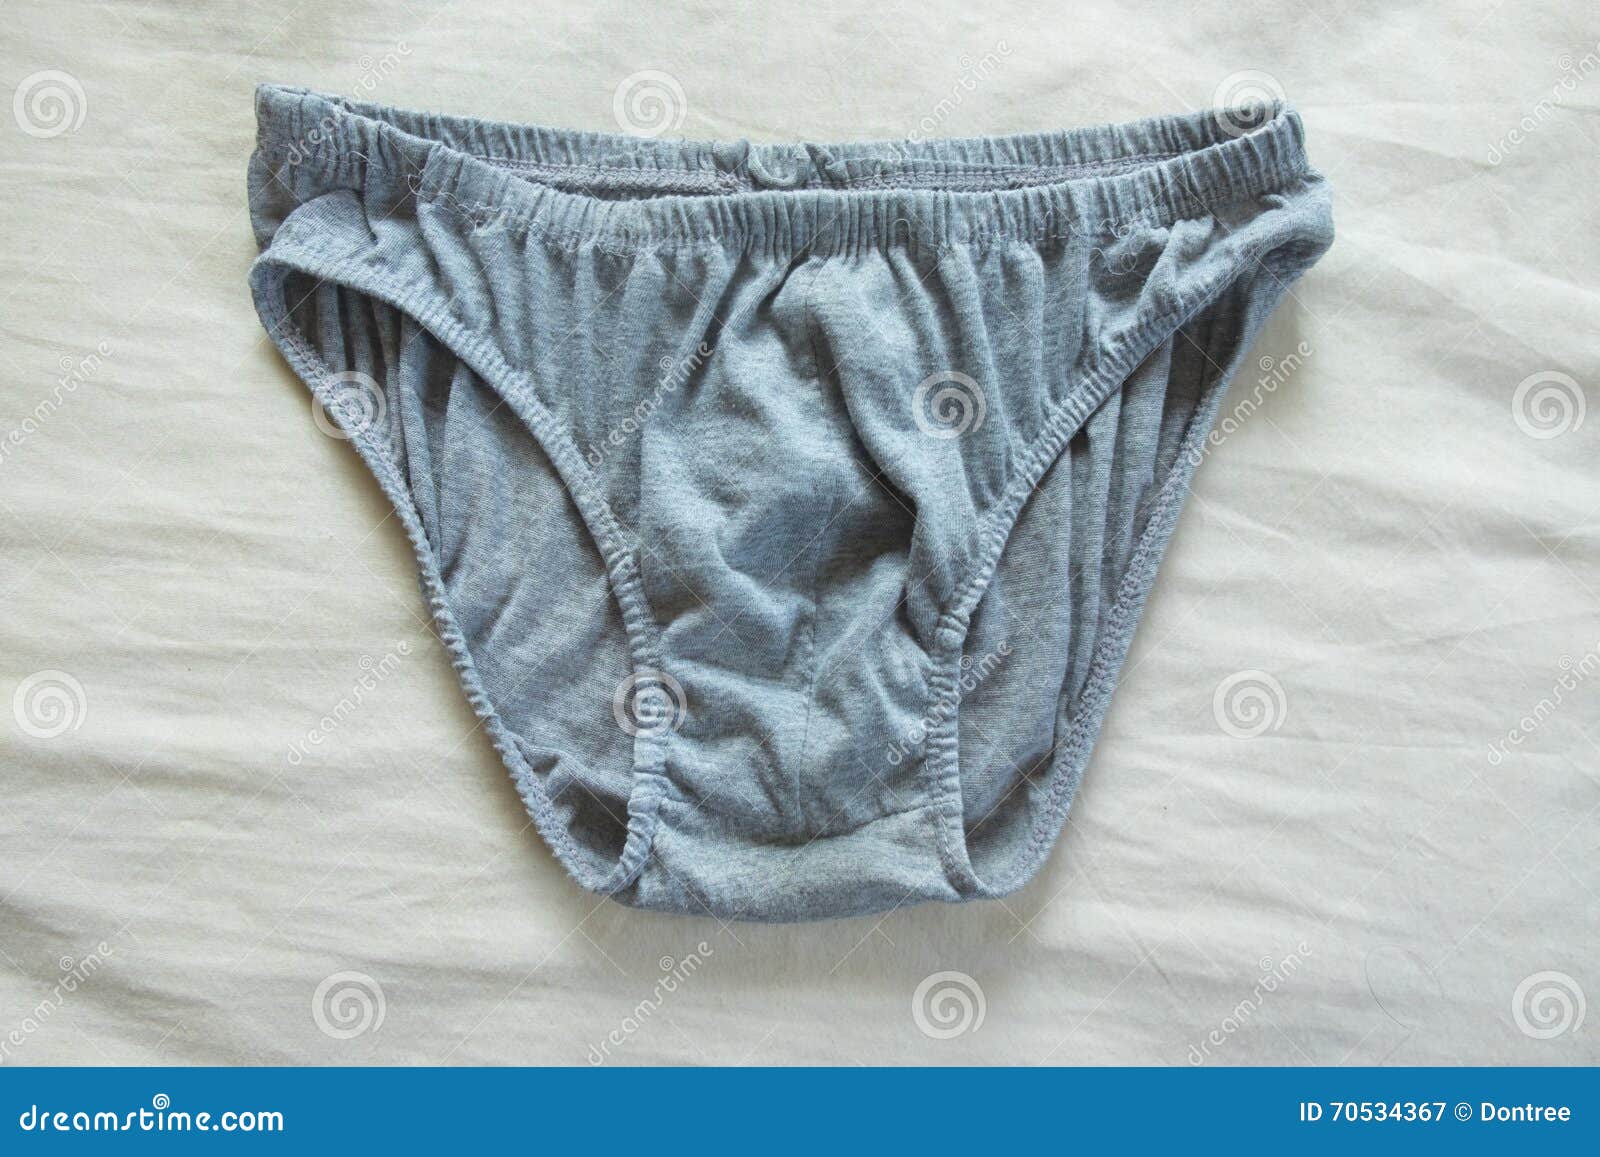 Male New underpants stock image. Image of tattered, ragged - 70534367